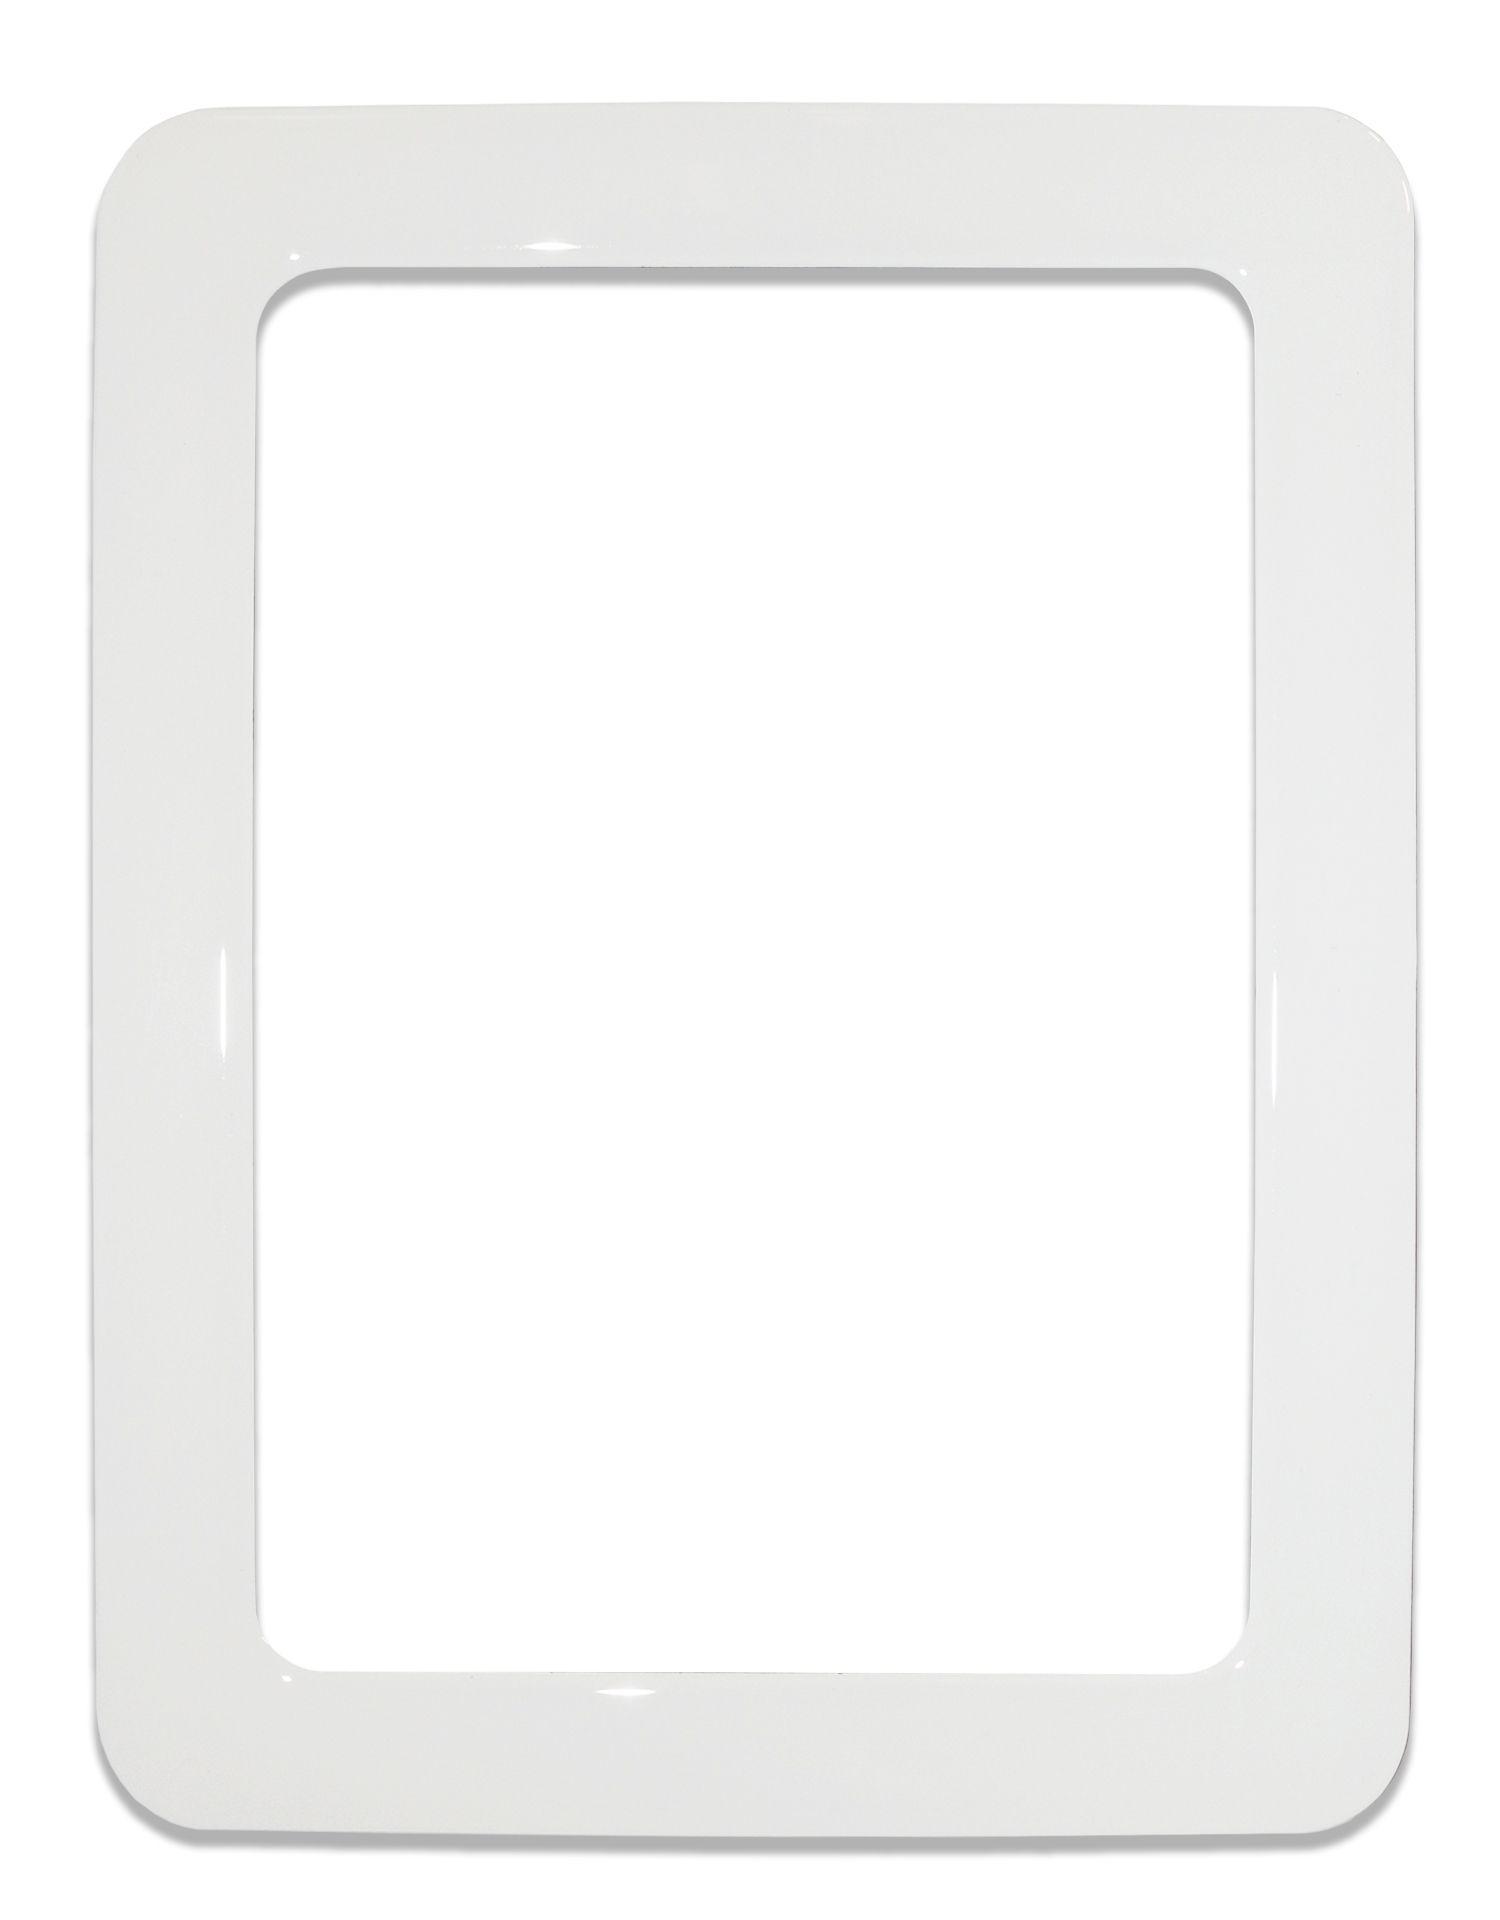 Magnetic self-adhesive frame size 16.0x11.8cm - white